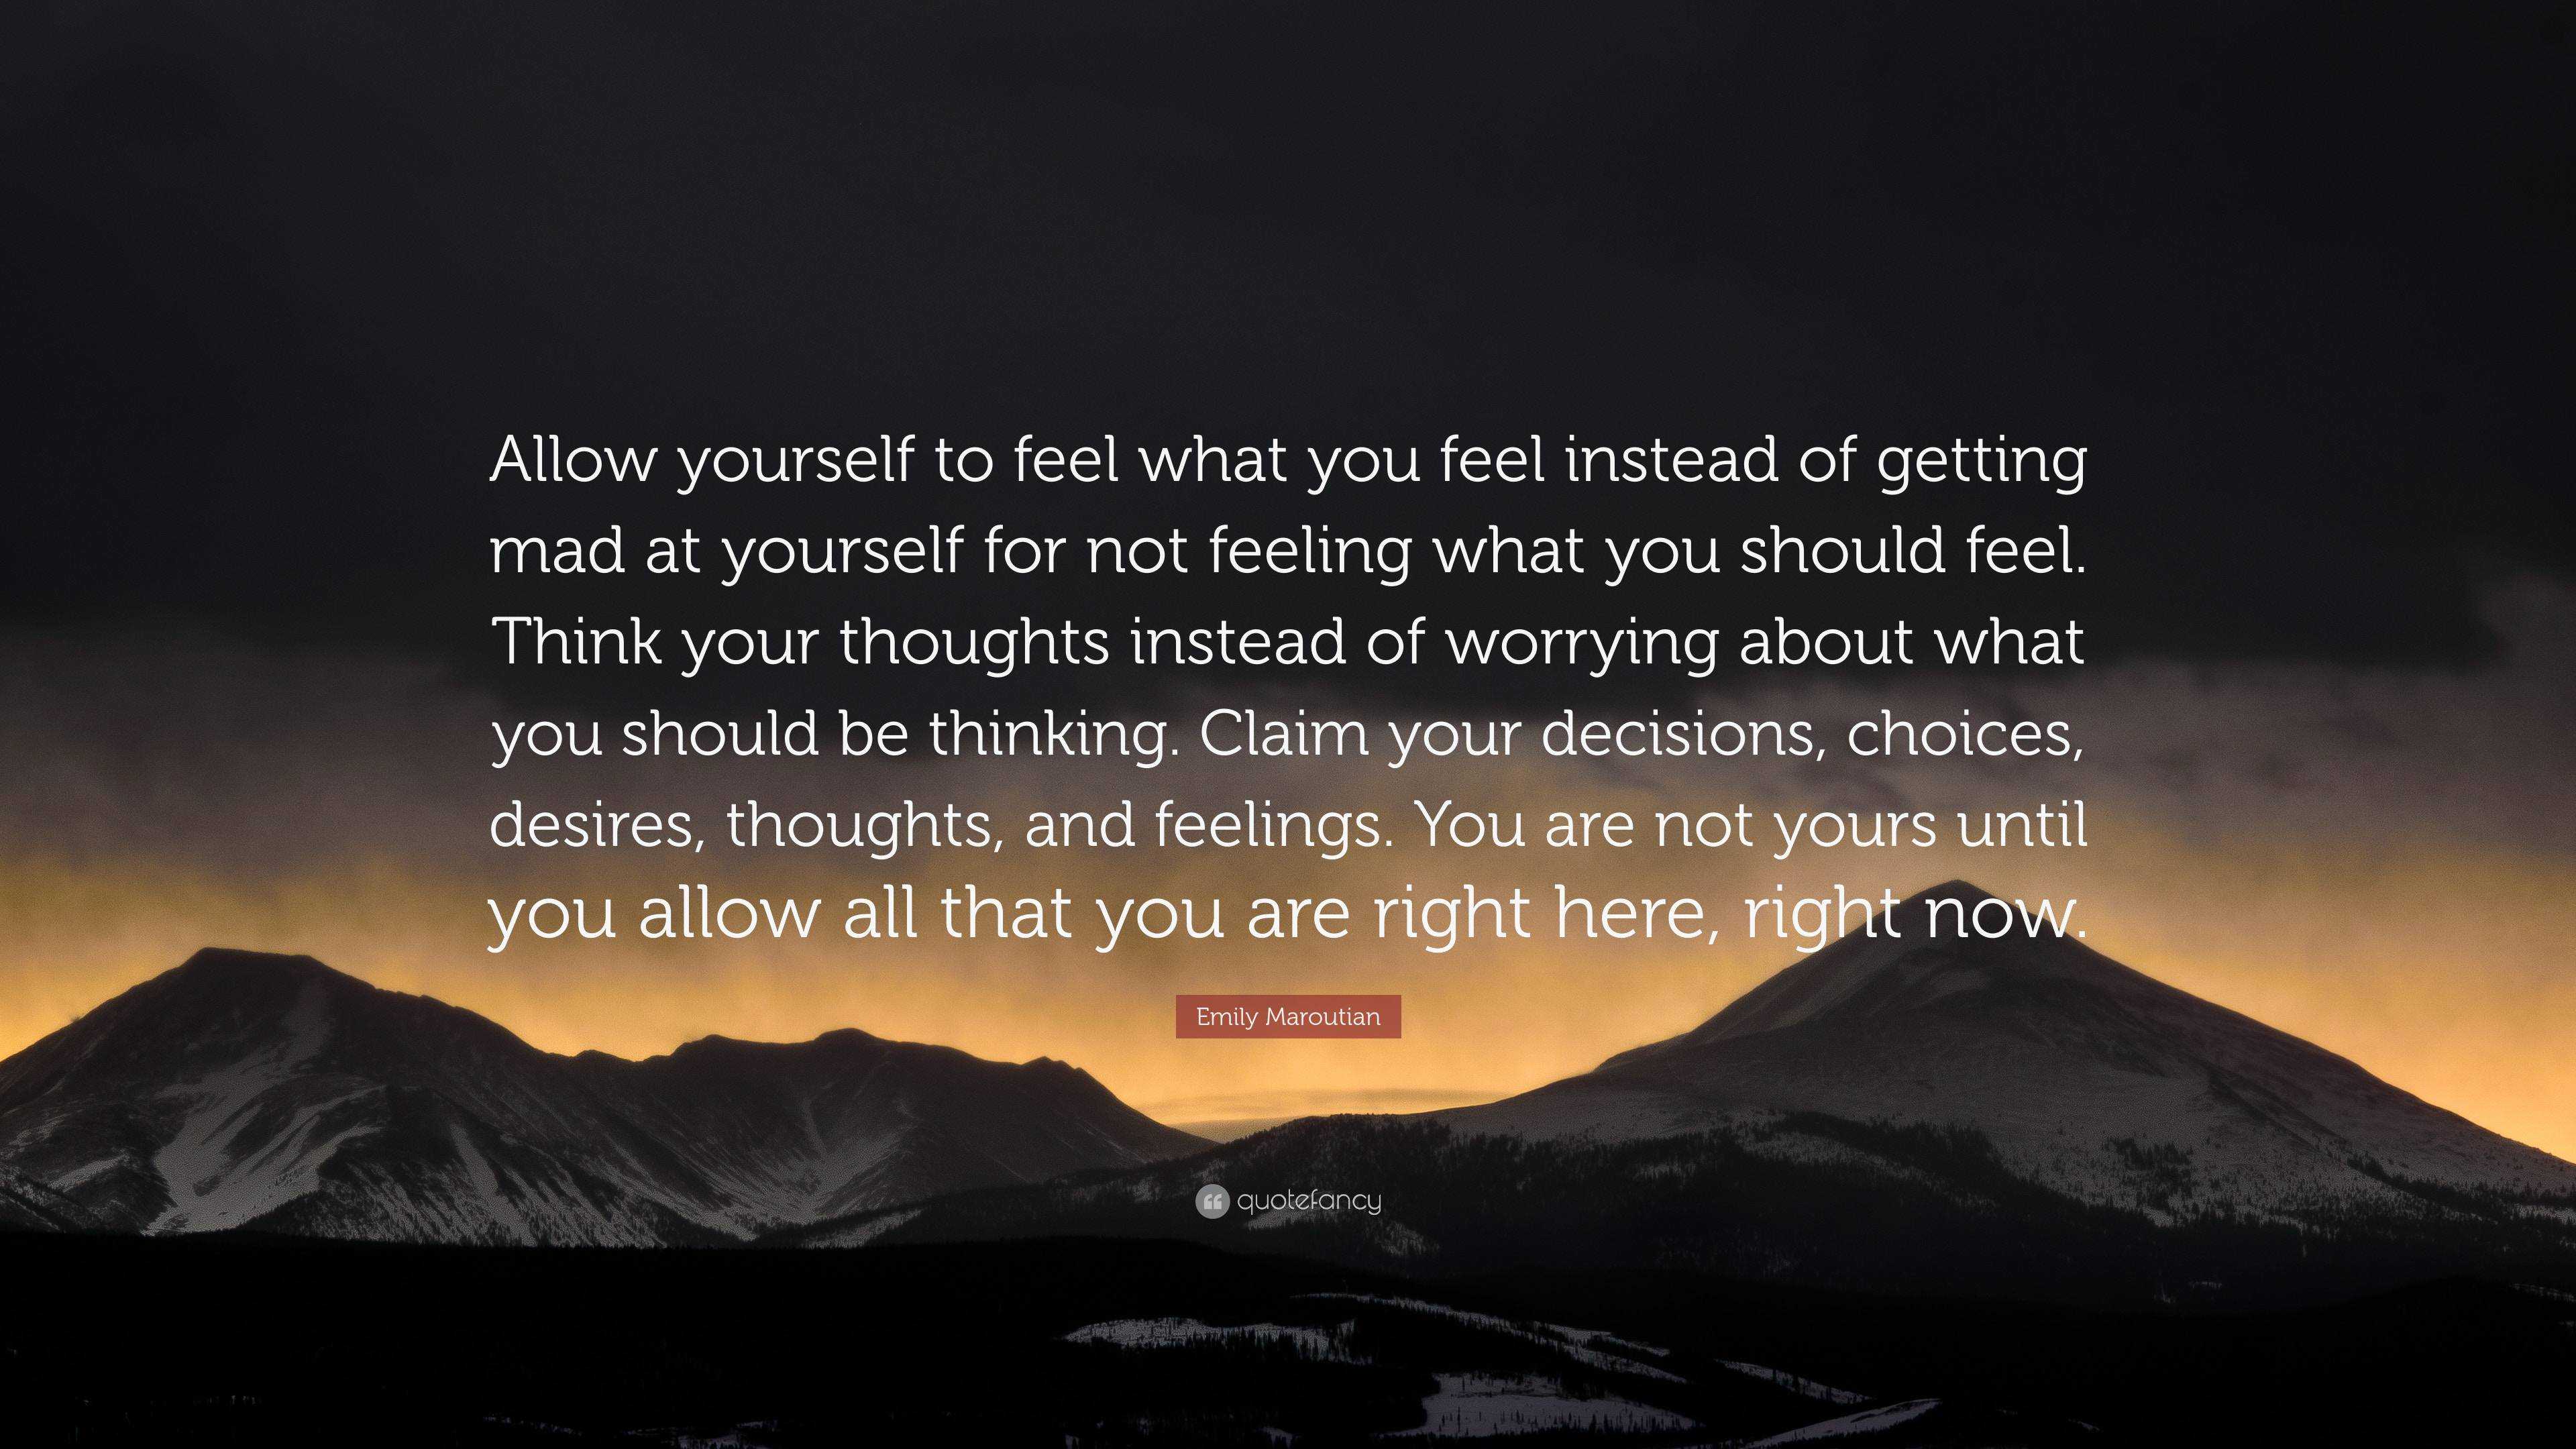 How to feel your feelings: Allowing yourself to feel fully